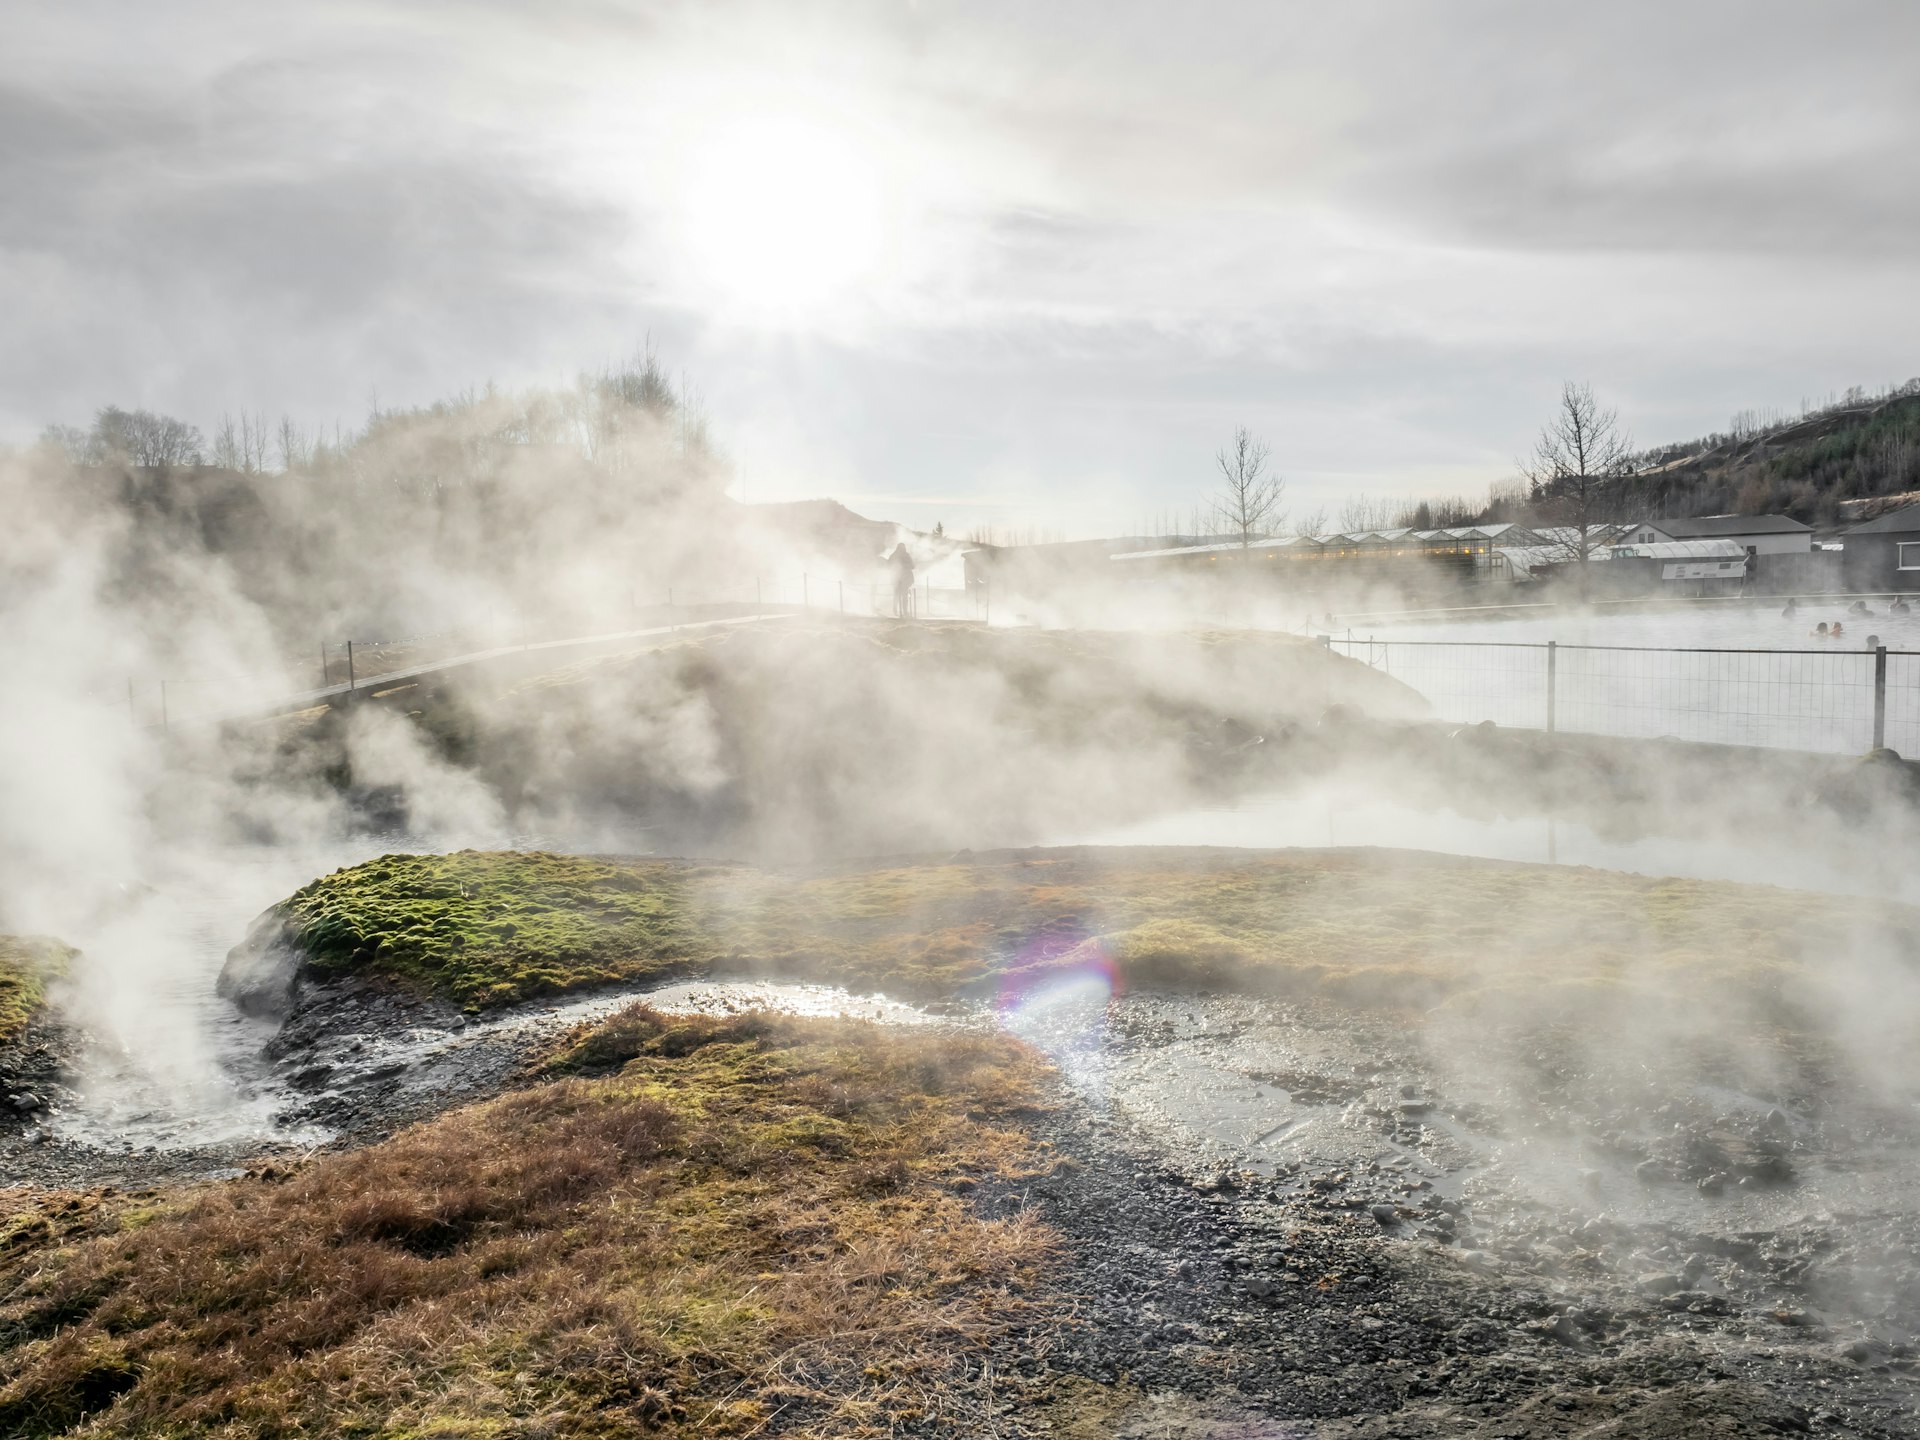 Steam rising from a grassy area near to a thermal pool